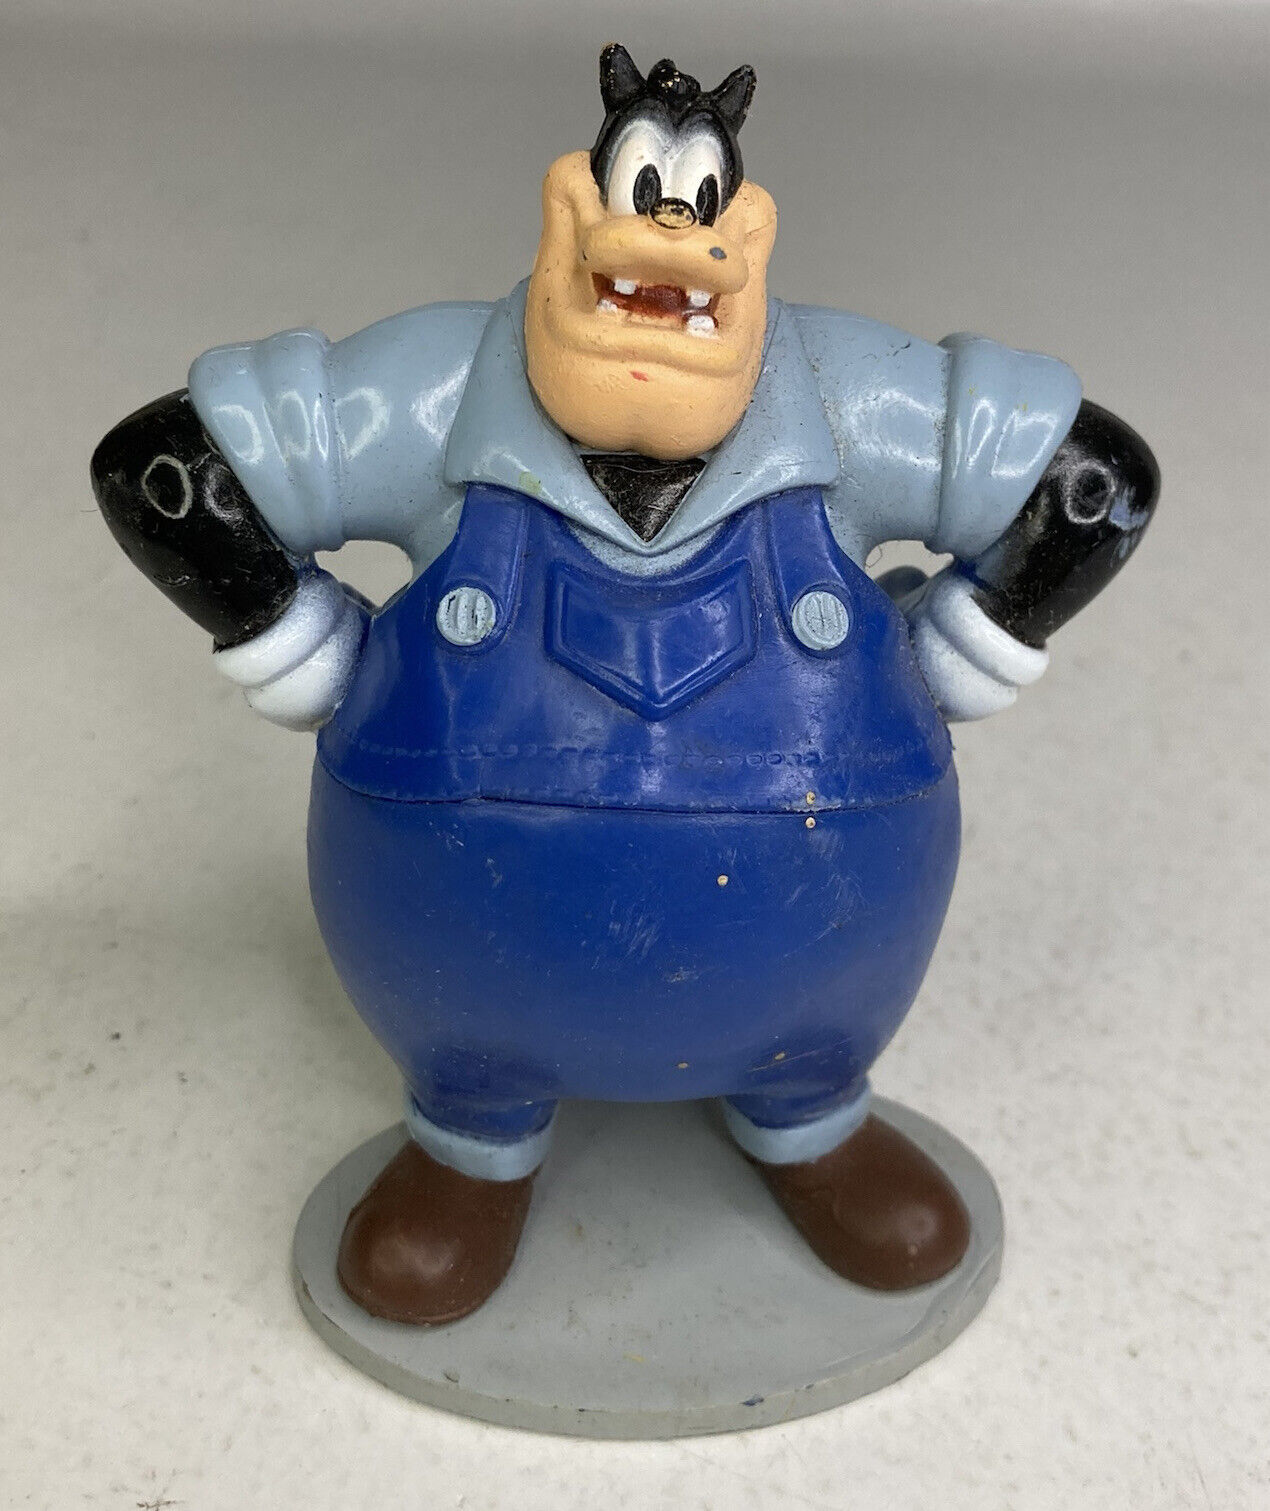 Disney Figure Pete in Blue Overalls Goofy Movie Cake Topper Toy